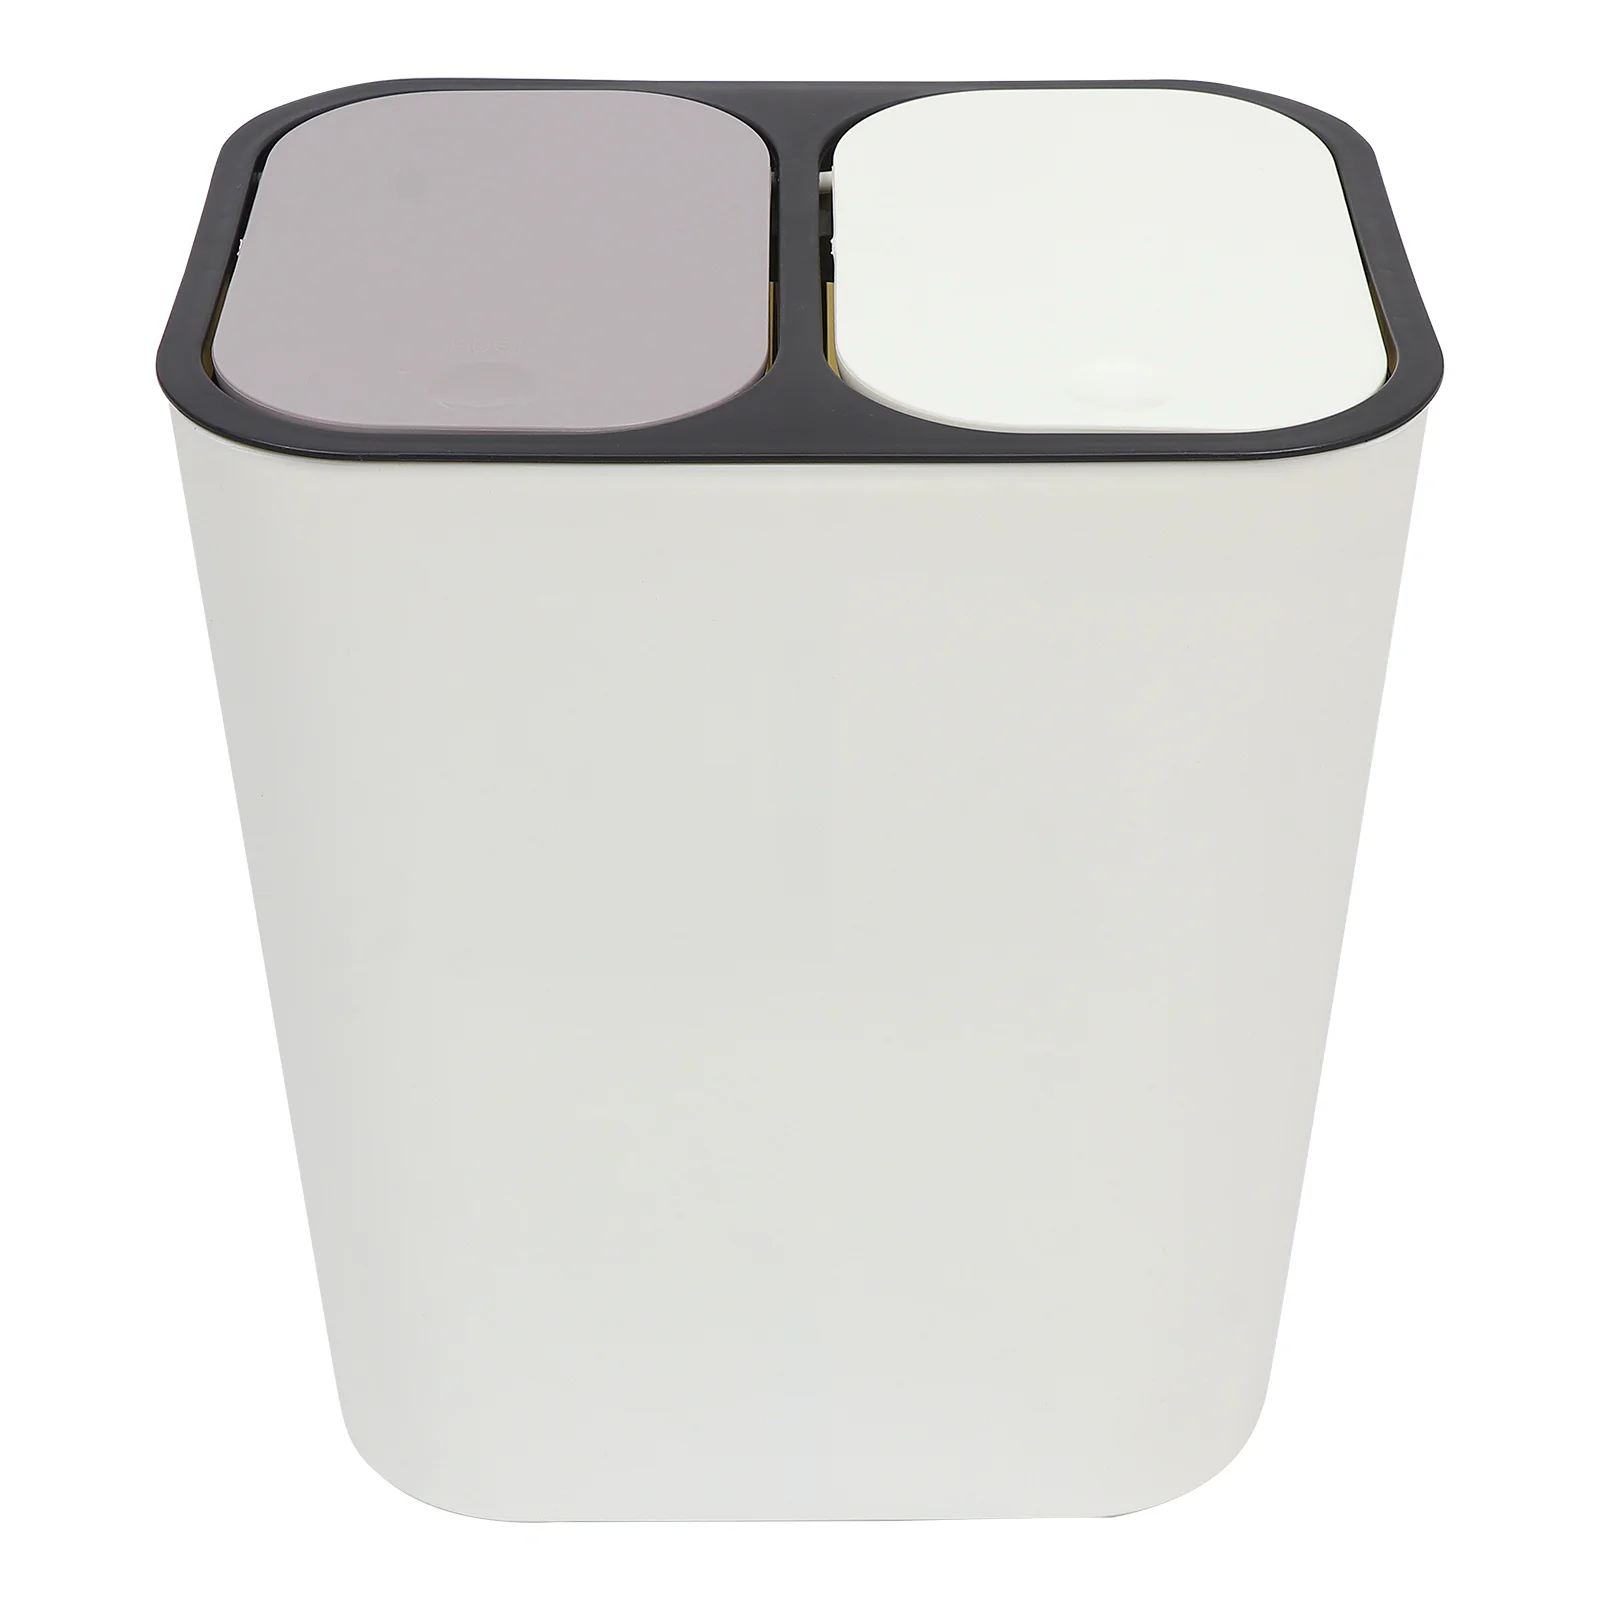 

Can Trash Garbage Bin Dual Container Kitchen Recycling Rubbish Waste Recycle Compartment Home Cans Wastebasket Paper Storage